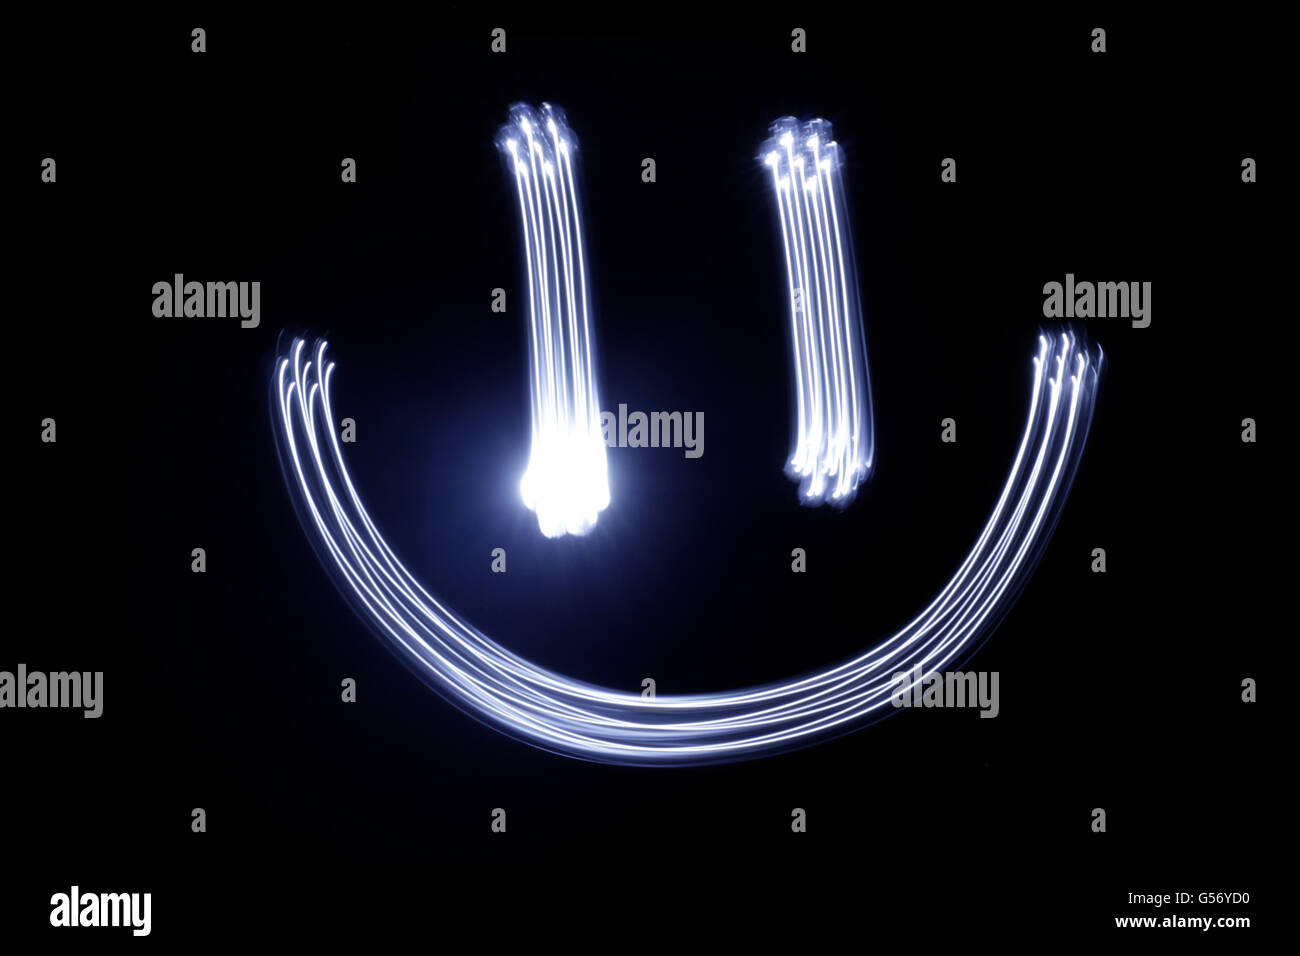 Photograph of a happy face drawing made with long exposure light effect Stock Photo